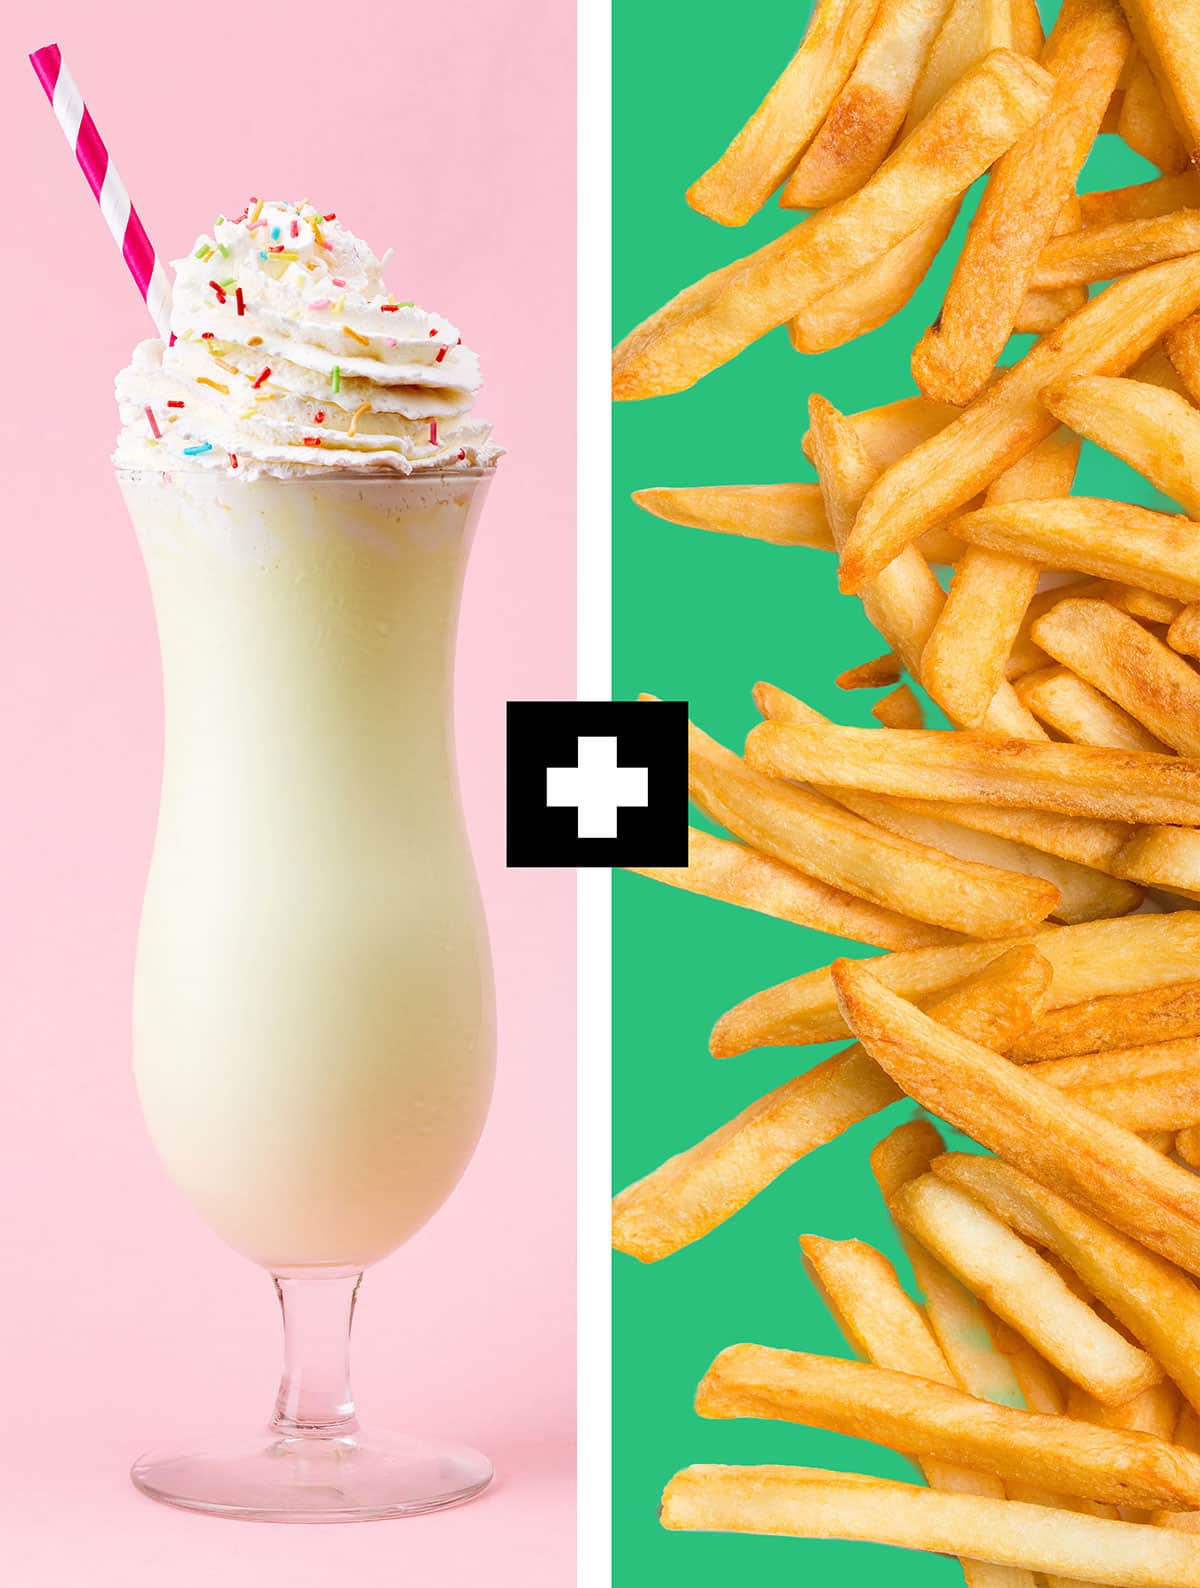 10 odd and unusual foods people actually eat